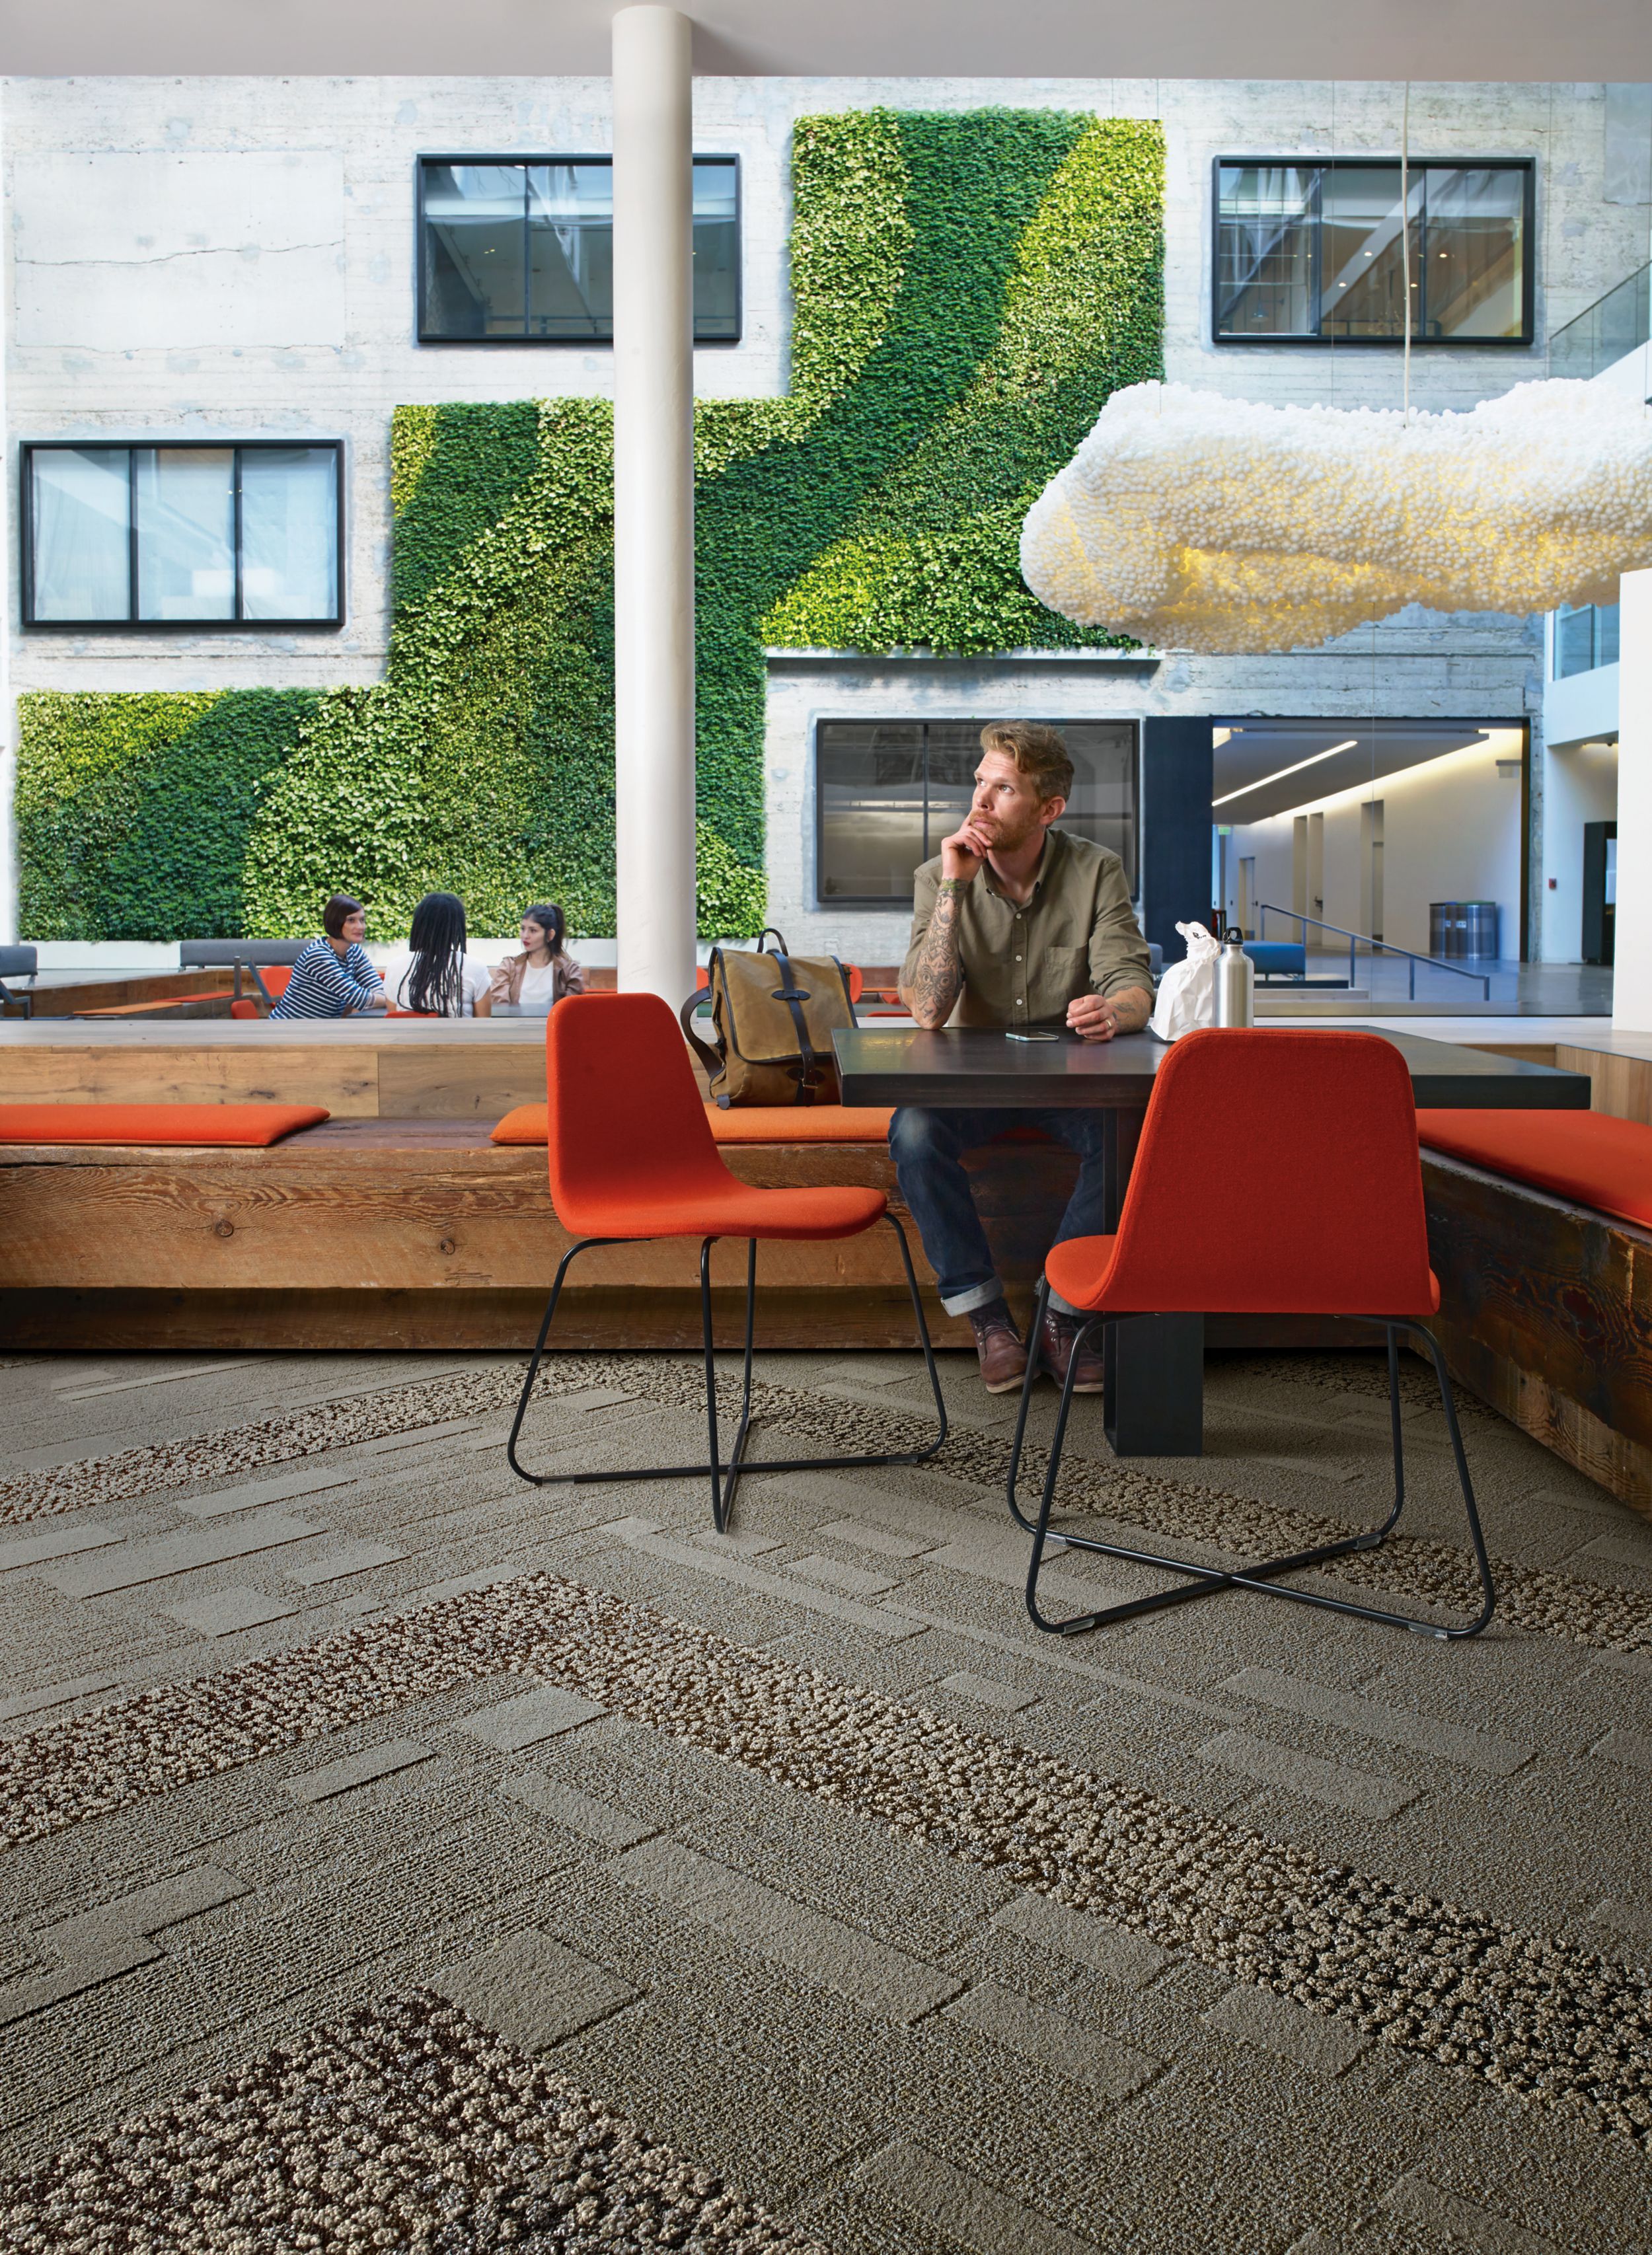 Interface EM552 plank carpet tile with man sitting at table with lunch and group meeting in front of vine wall in the background  Bildnummer 3